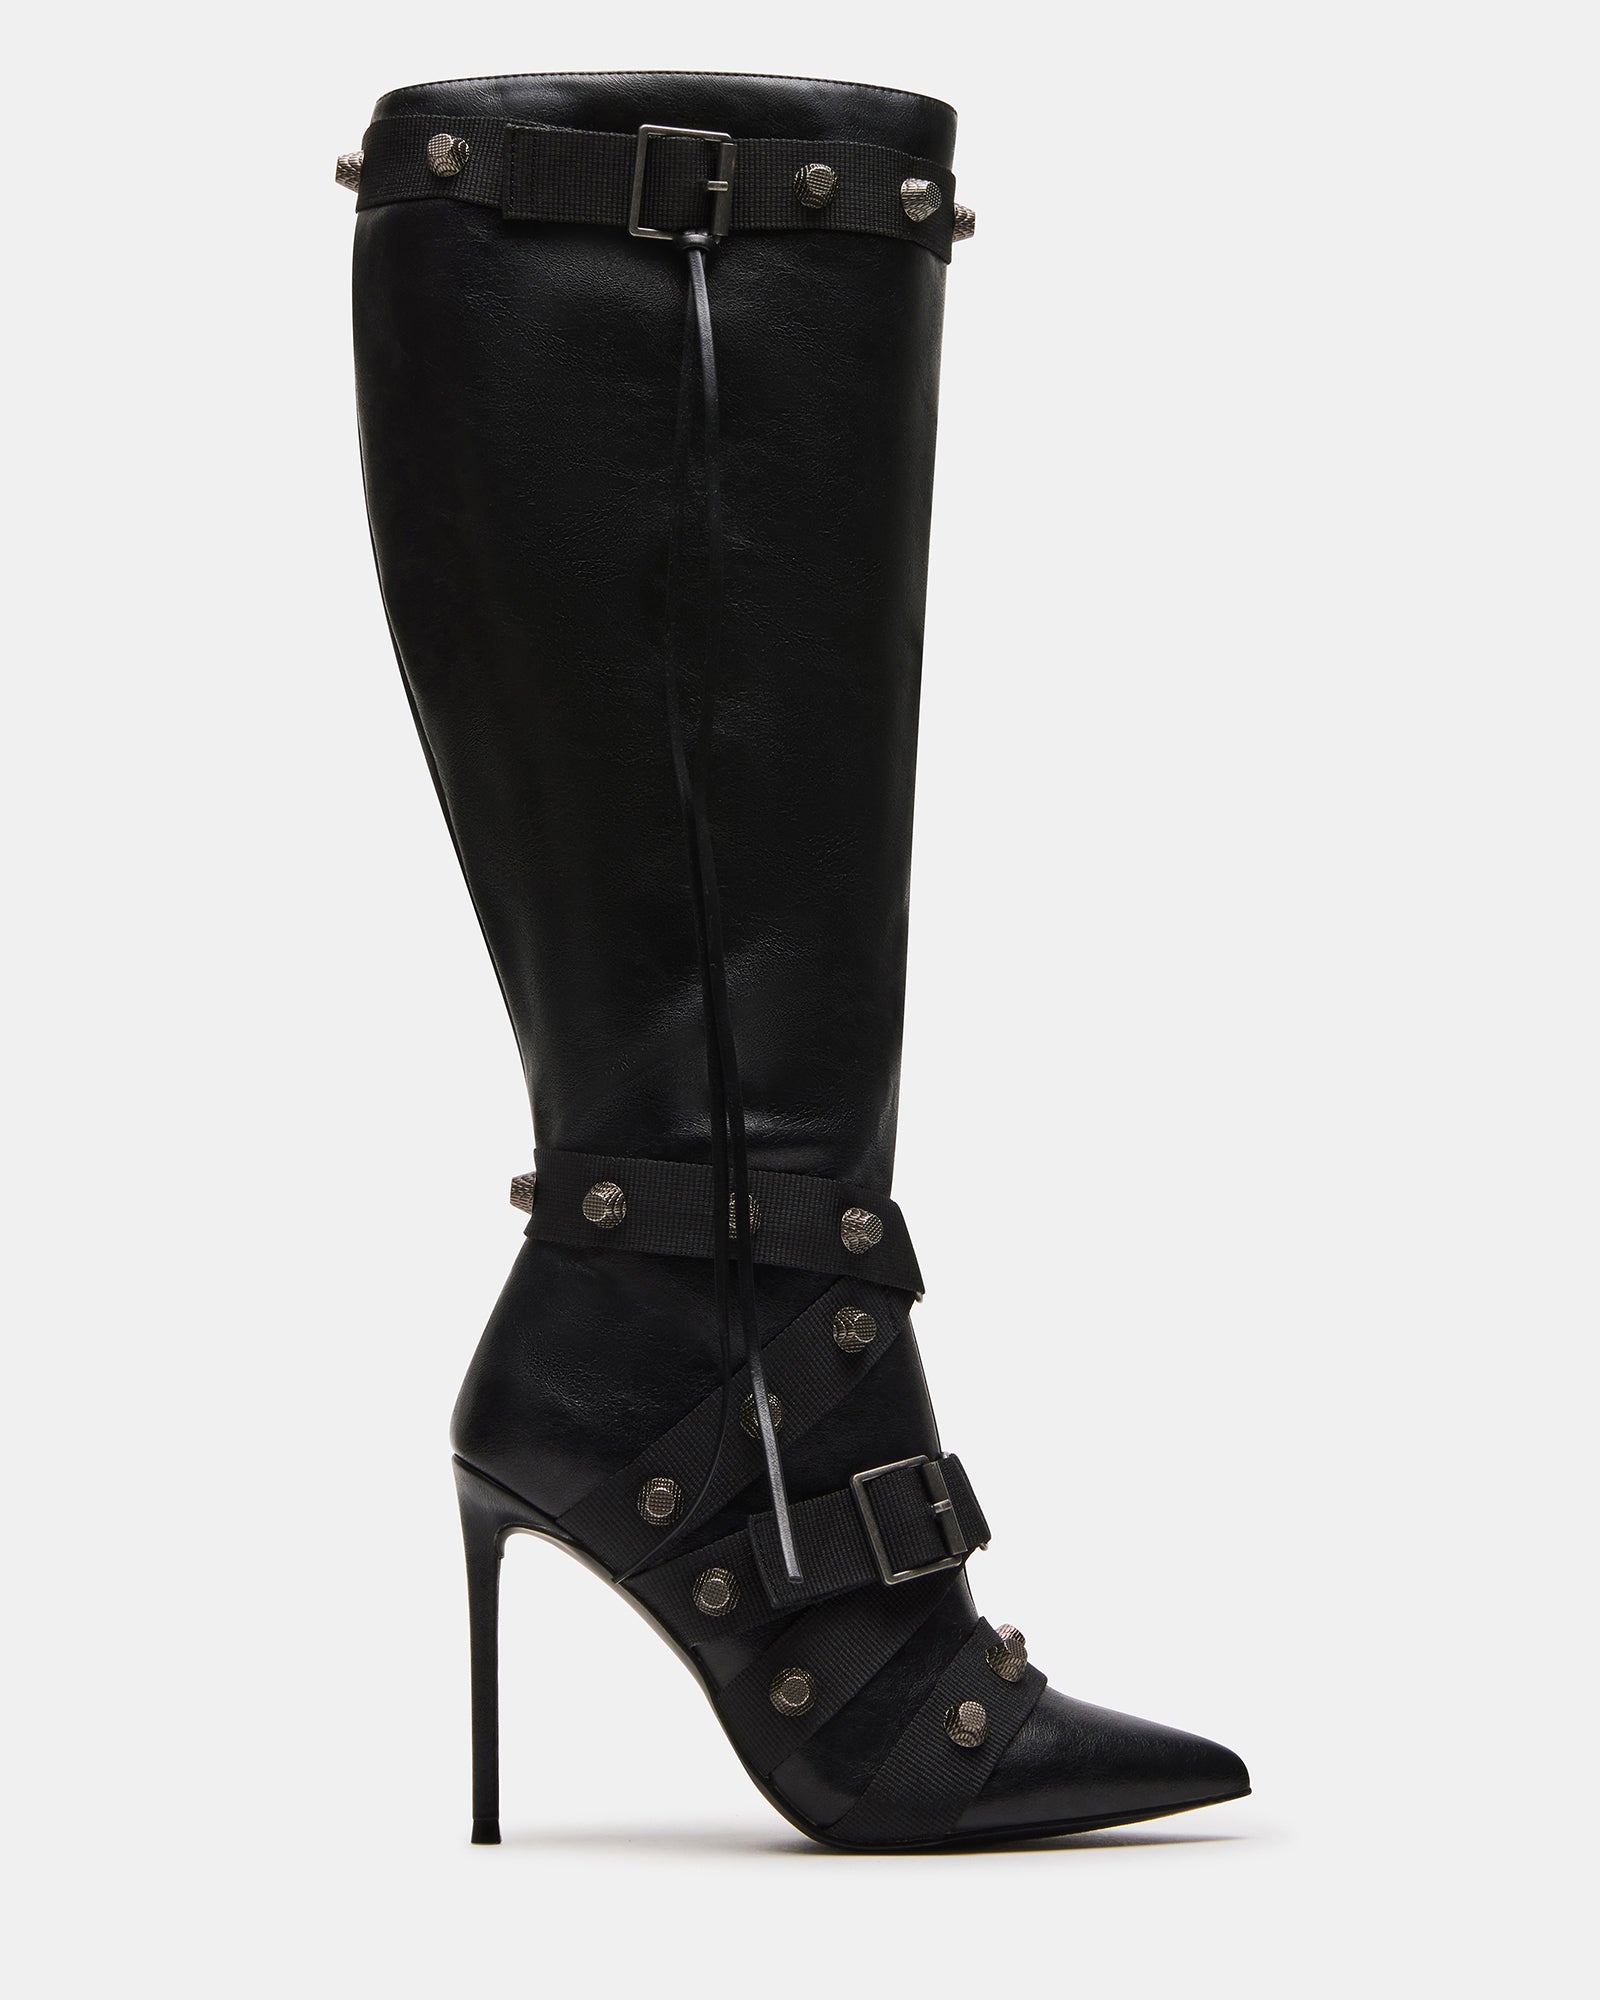 CHRISTIAN LOUBOUTIN Pumppie 85 leather ankle boots | NET-A-PORTER